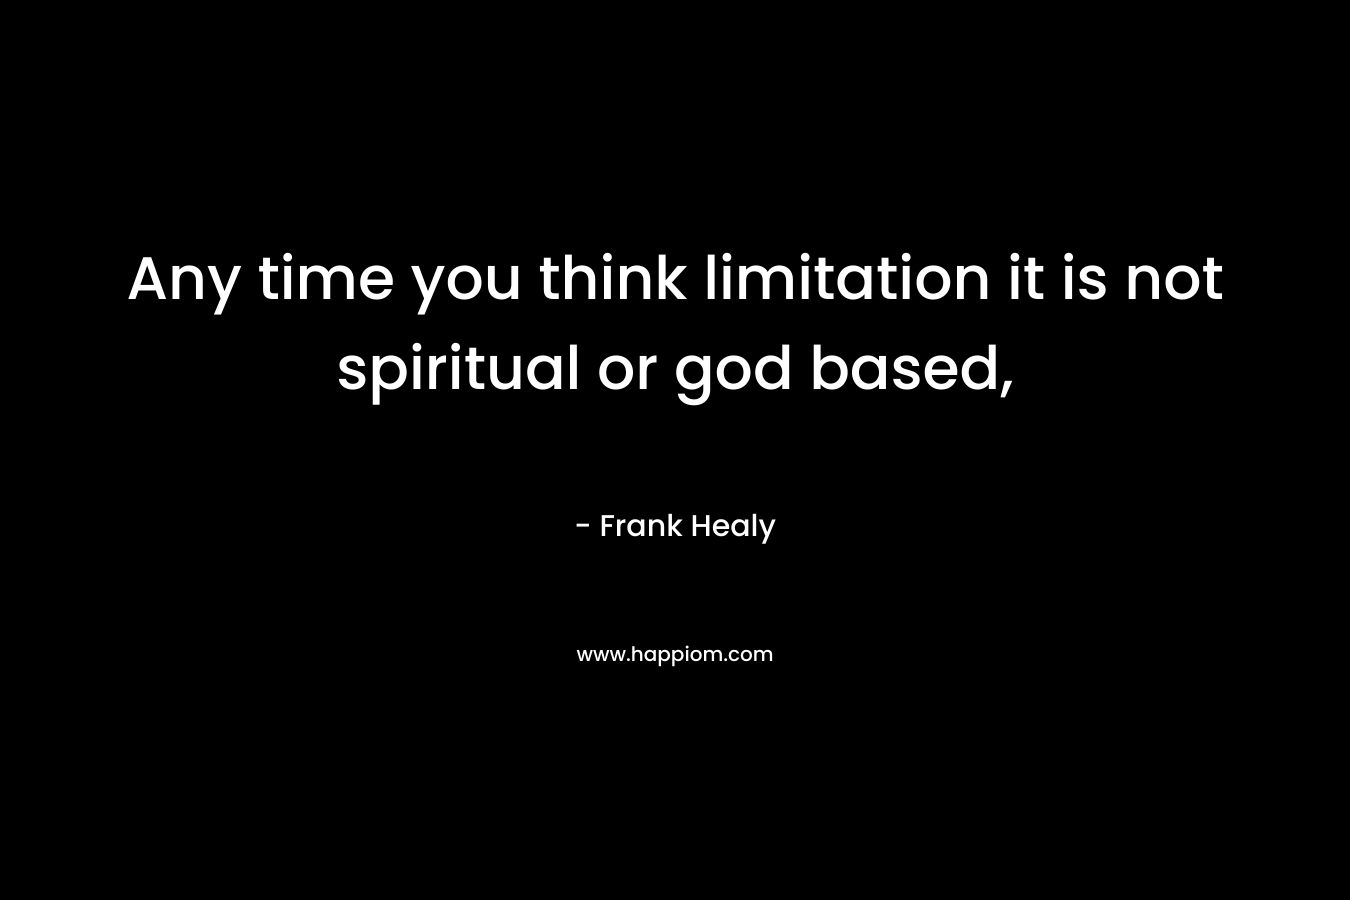 Any time you think limitation it is not spiritual or god based, – Frank Healy